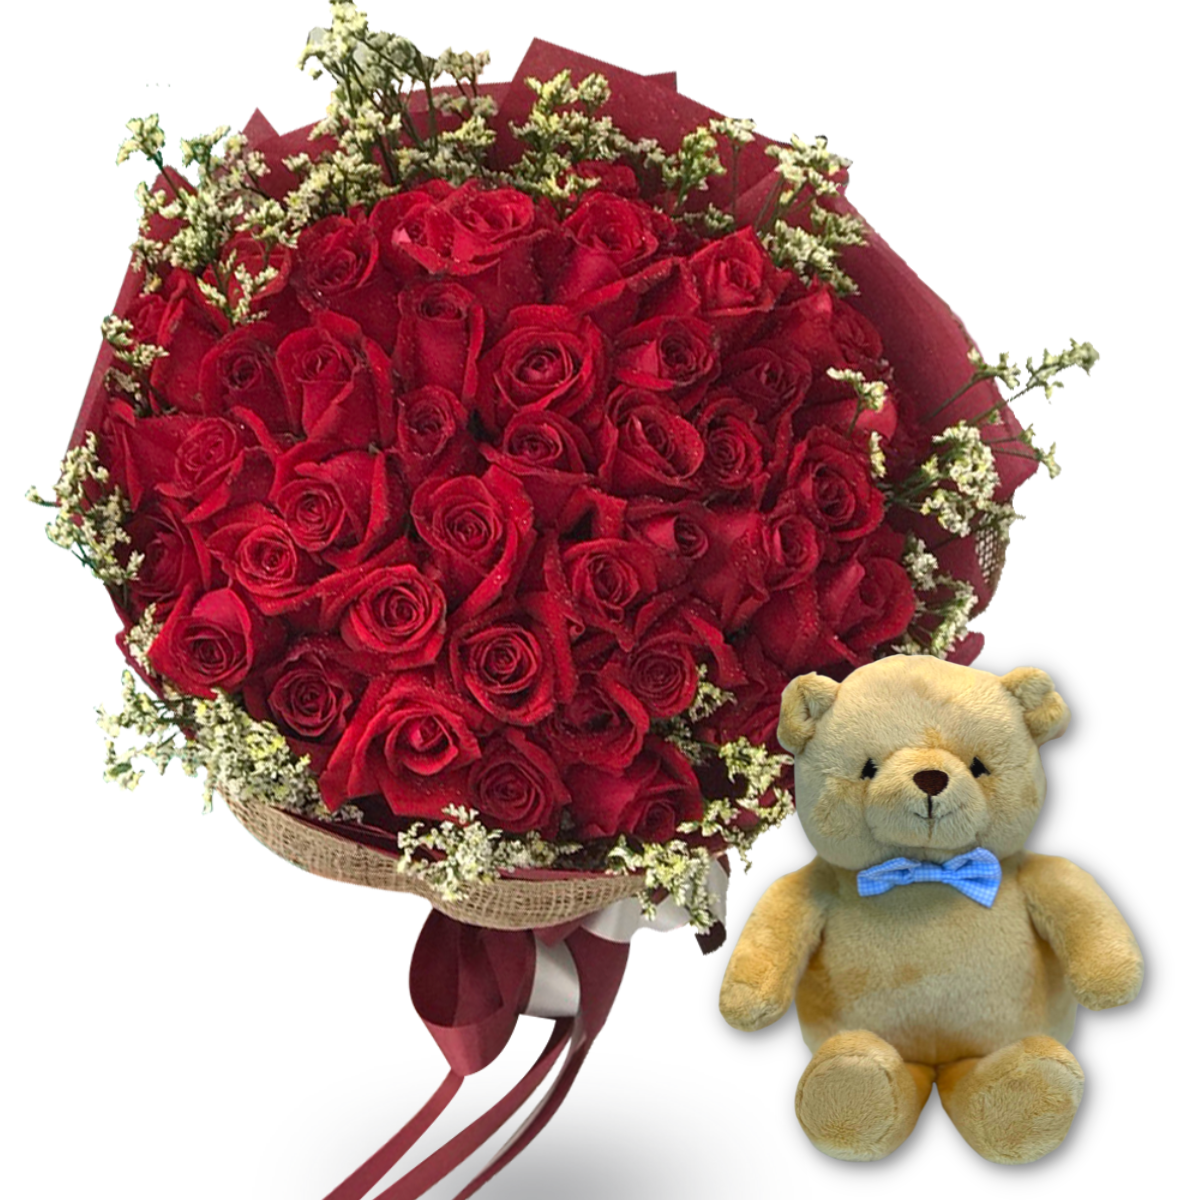 "Love and Happiness" Bouquet Of 50 Red Roses with Teddy Bear with Bow Tie